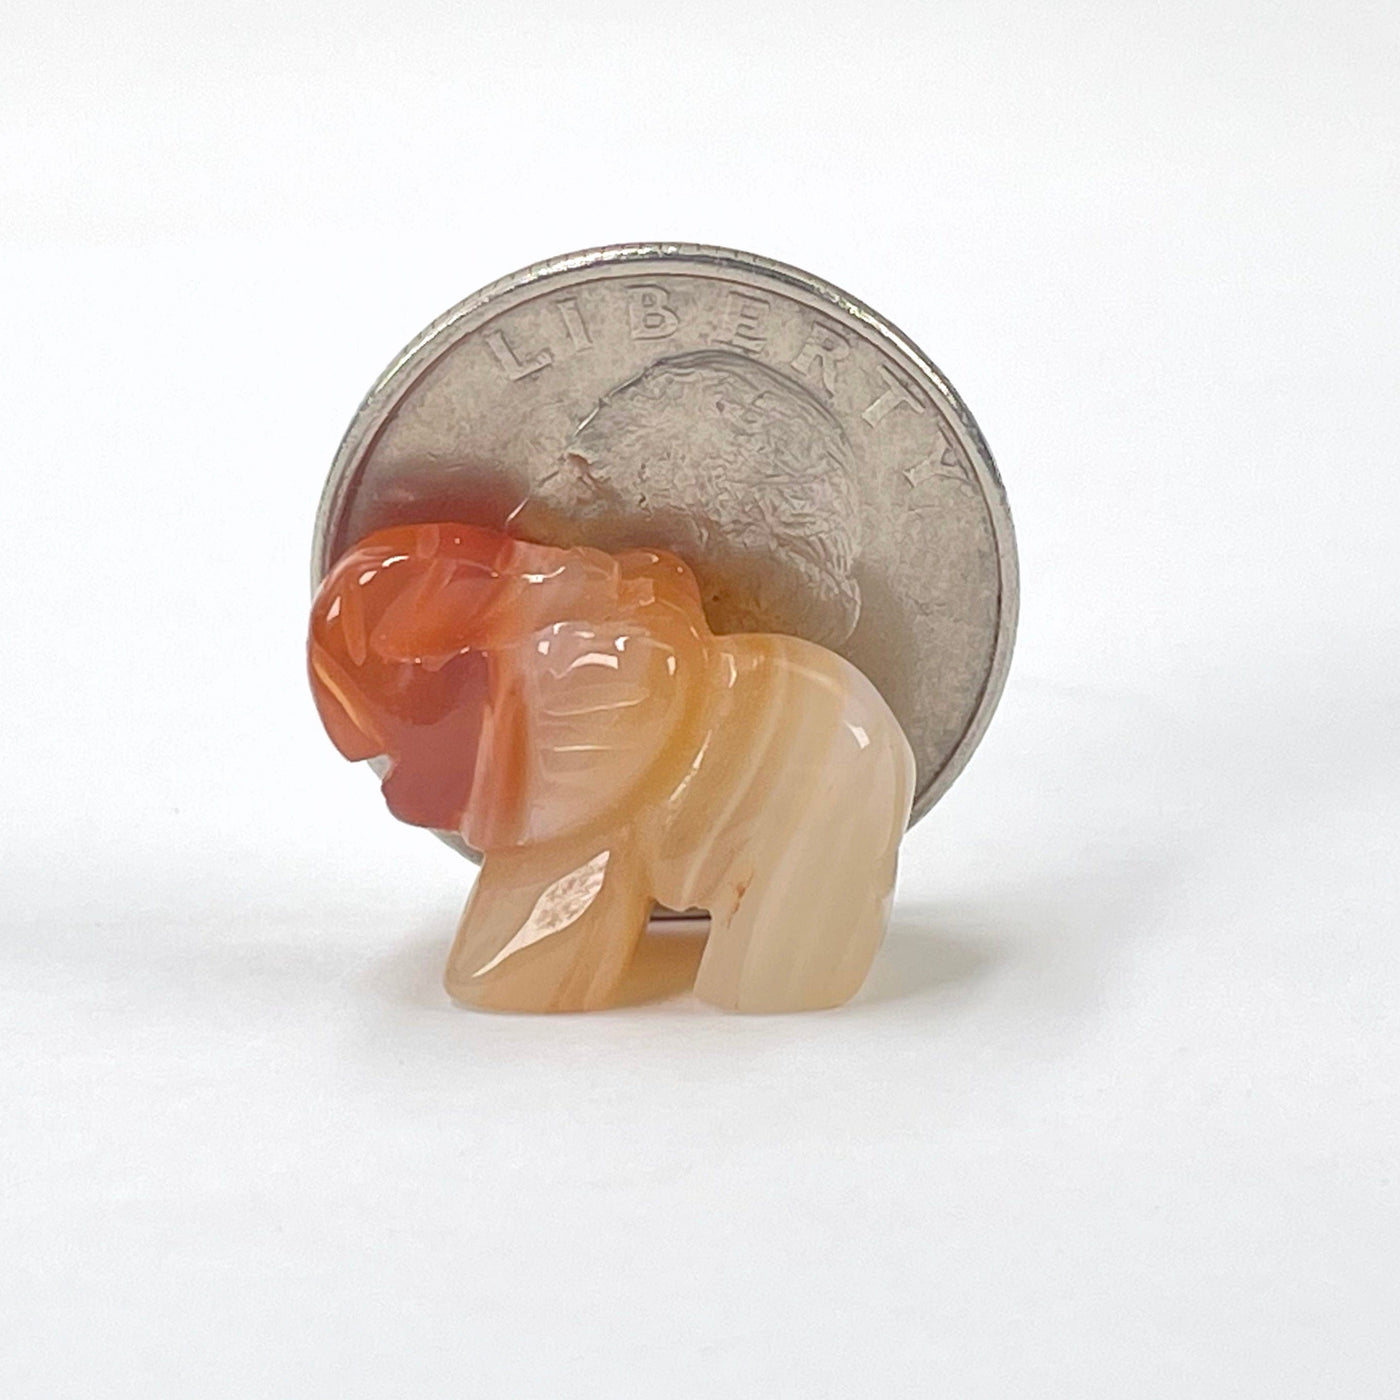 close up of gemstone elephant with quarter for size reference